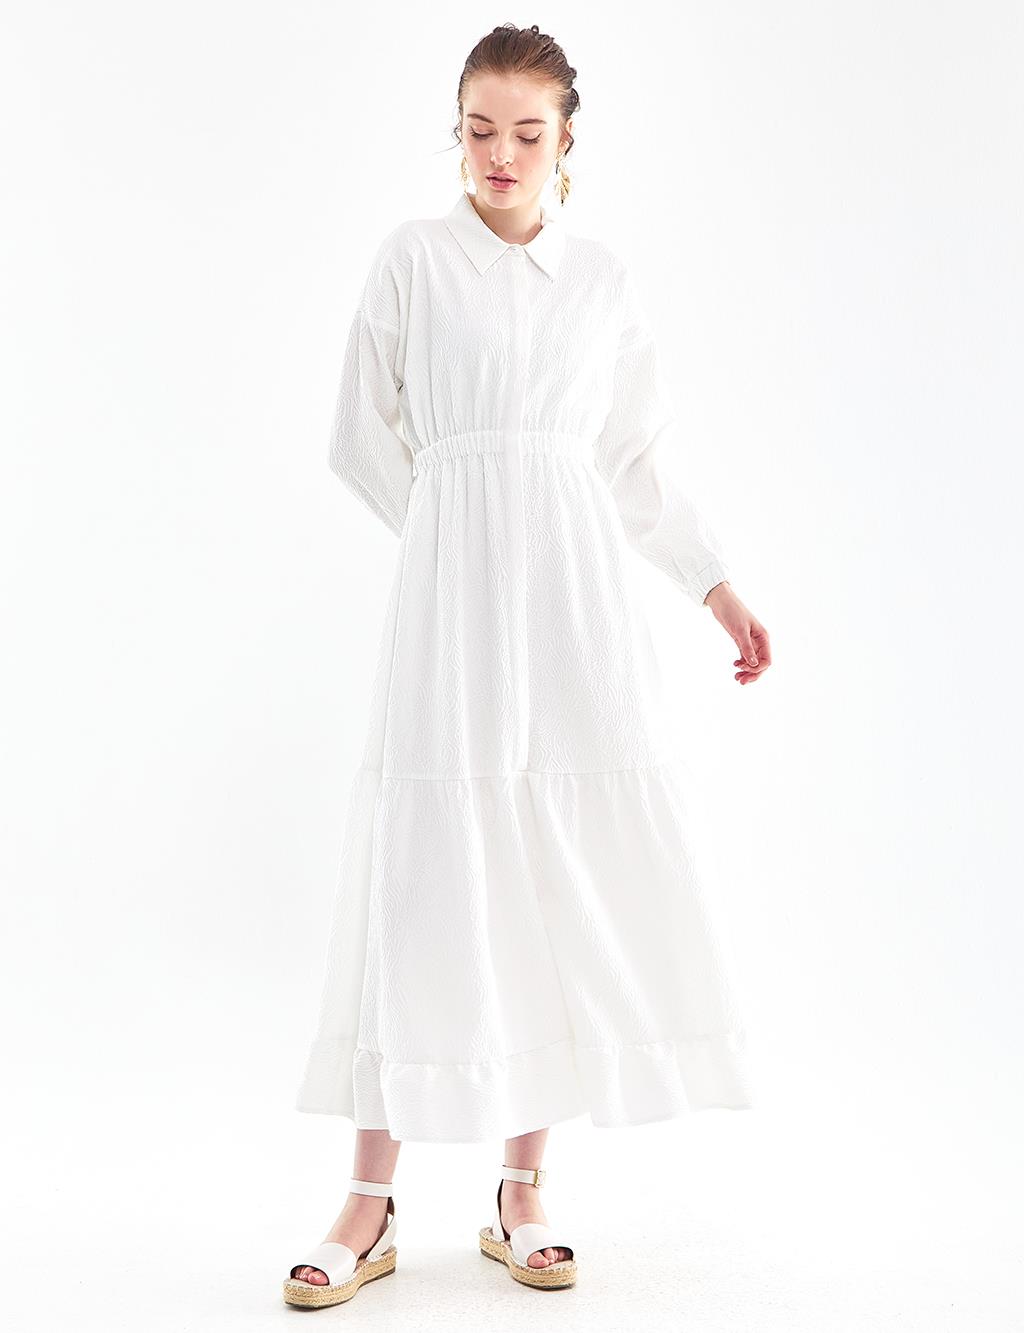 Layered Relief Pattern Dress White